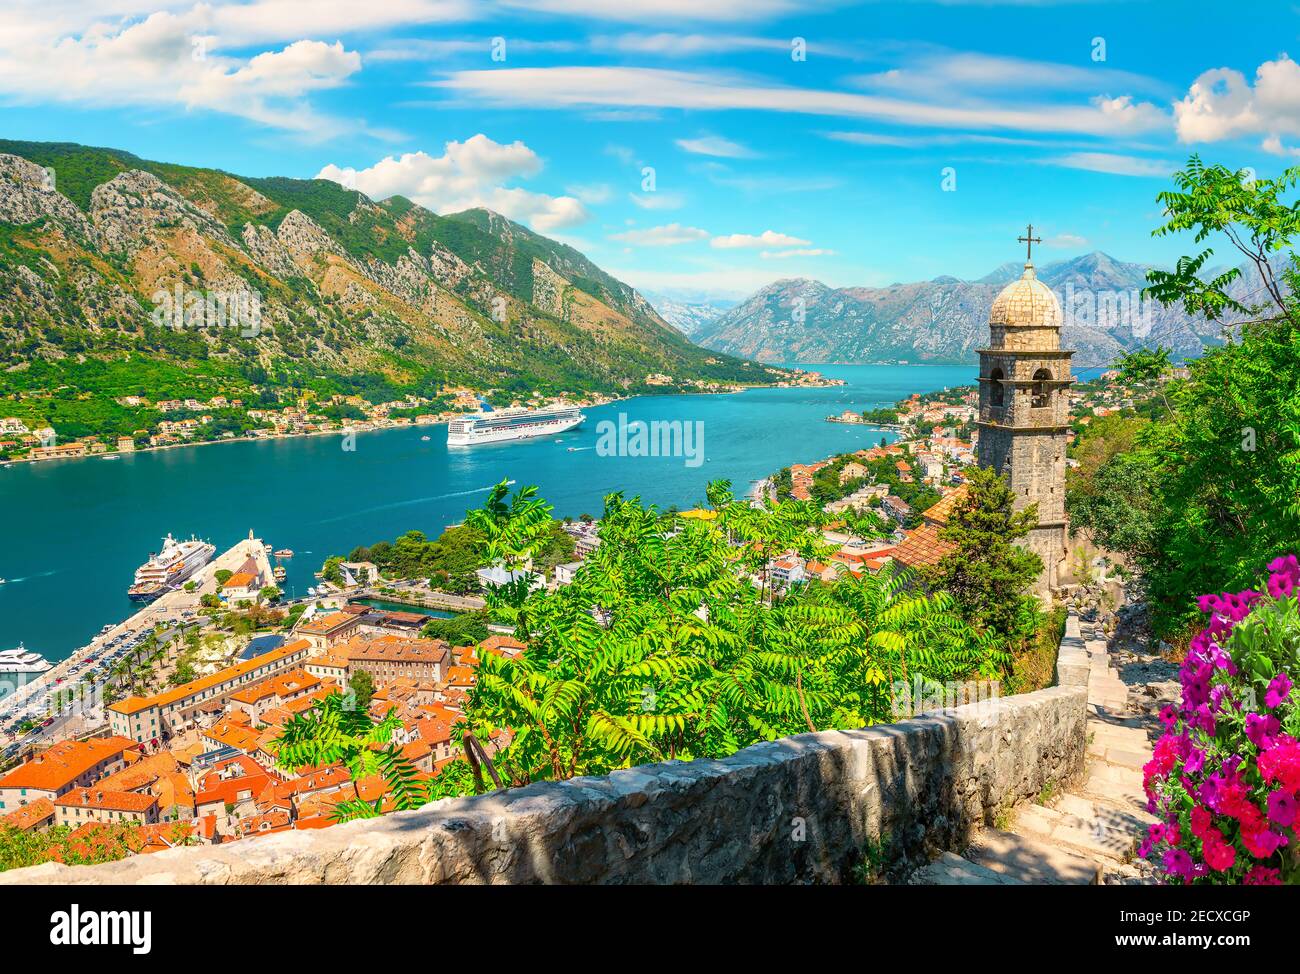 Church of Our Lady of Remedy in Kotor and flowers Stock Photo